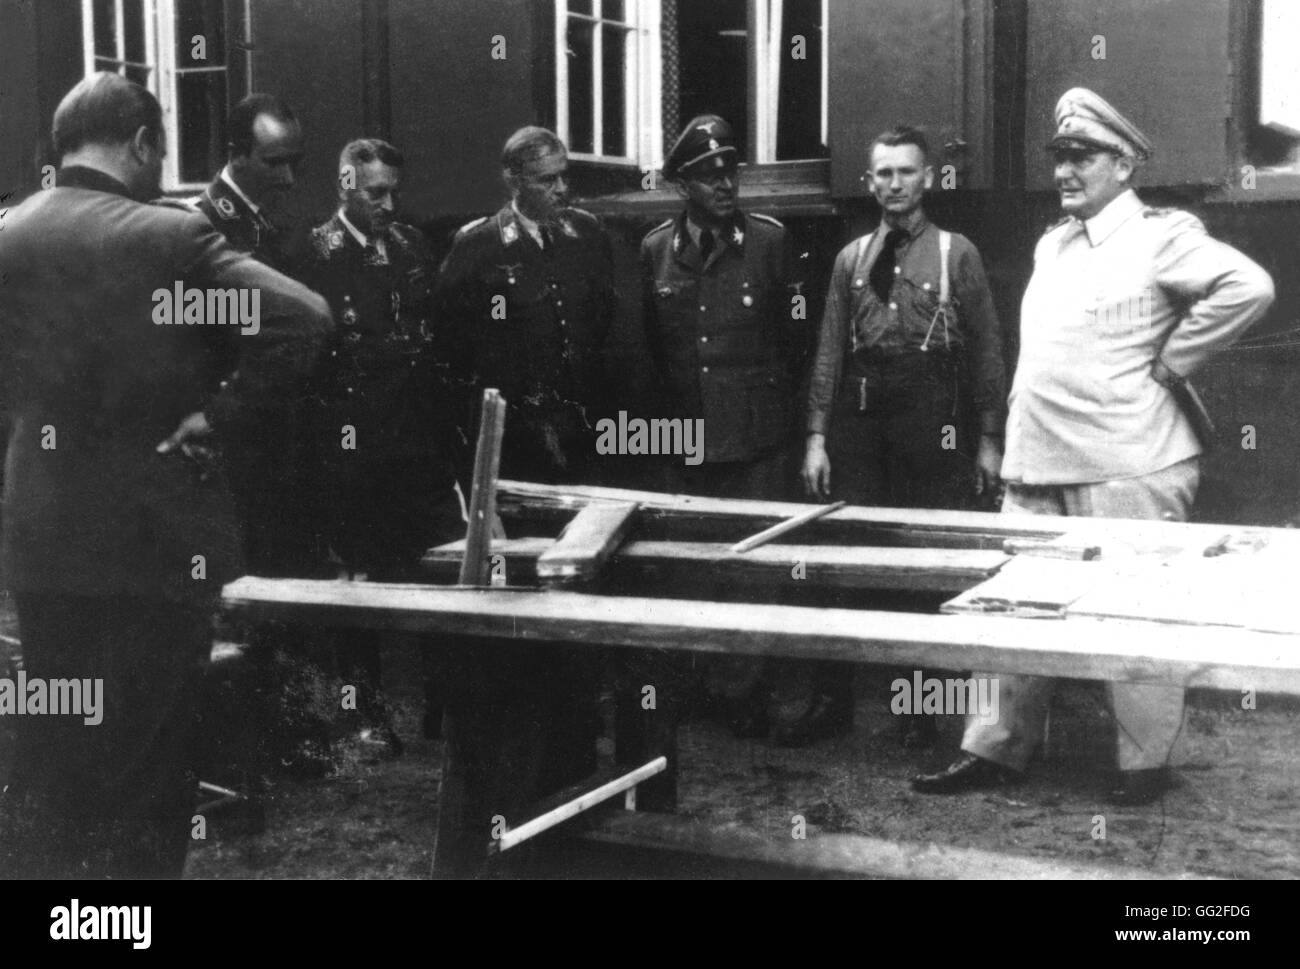 After the assassination attempt against Hitler. Göering, Schaub (3rd on the r.), Koller  (3rd on the l.) and Fegelein look at the site. July 20, 1944 Germany - Second World War Stock Photo